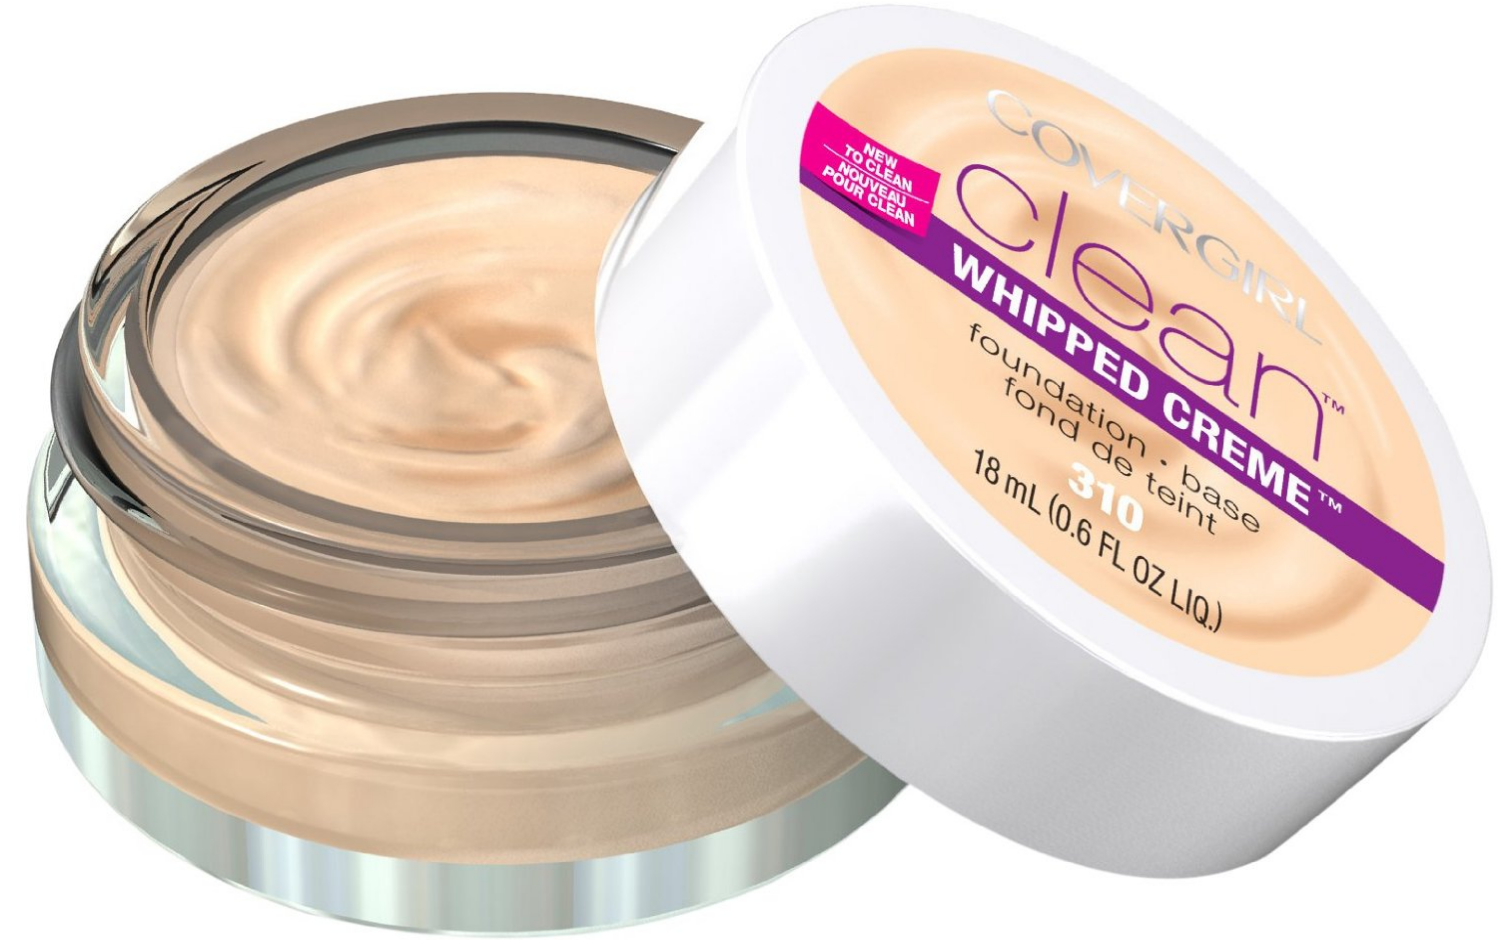 CoverGirl 305 Clean Whipped Creme Foundation